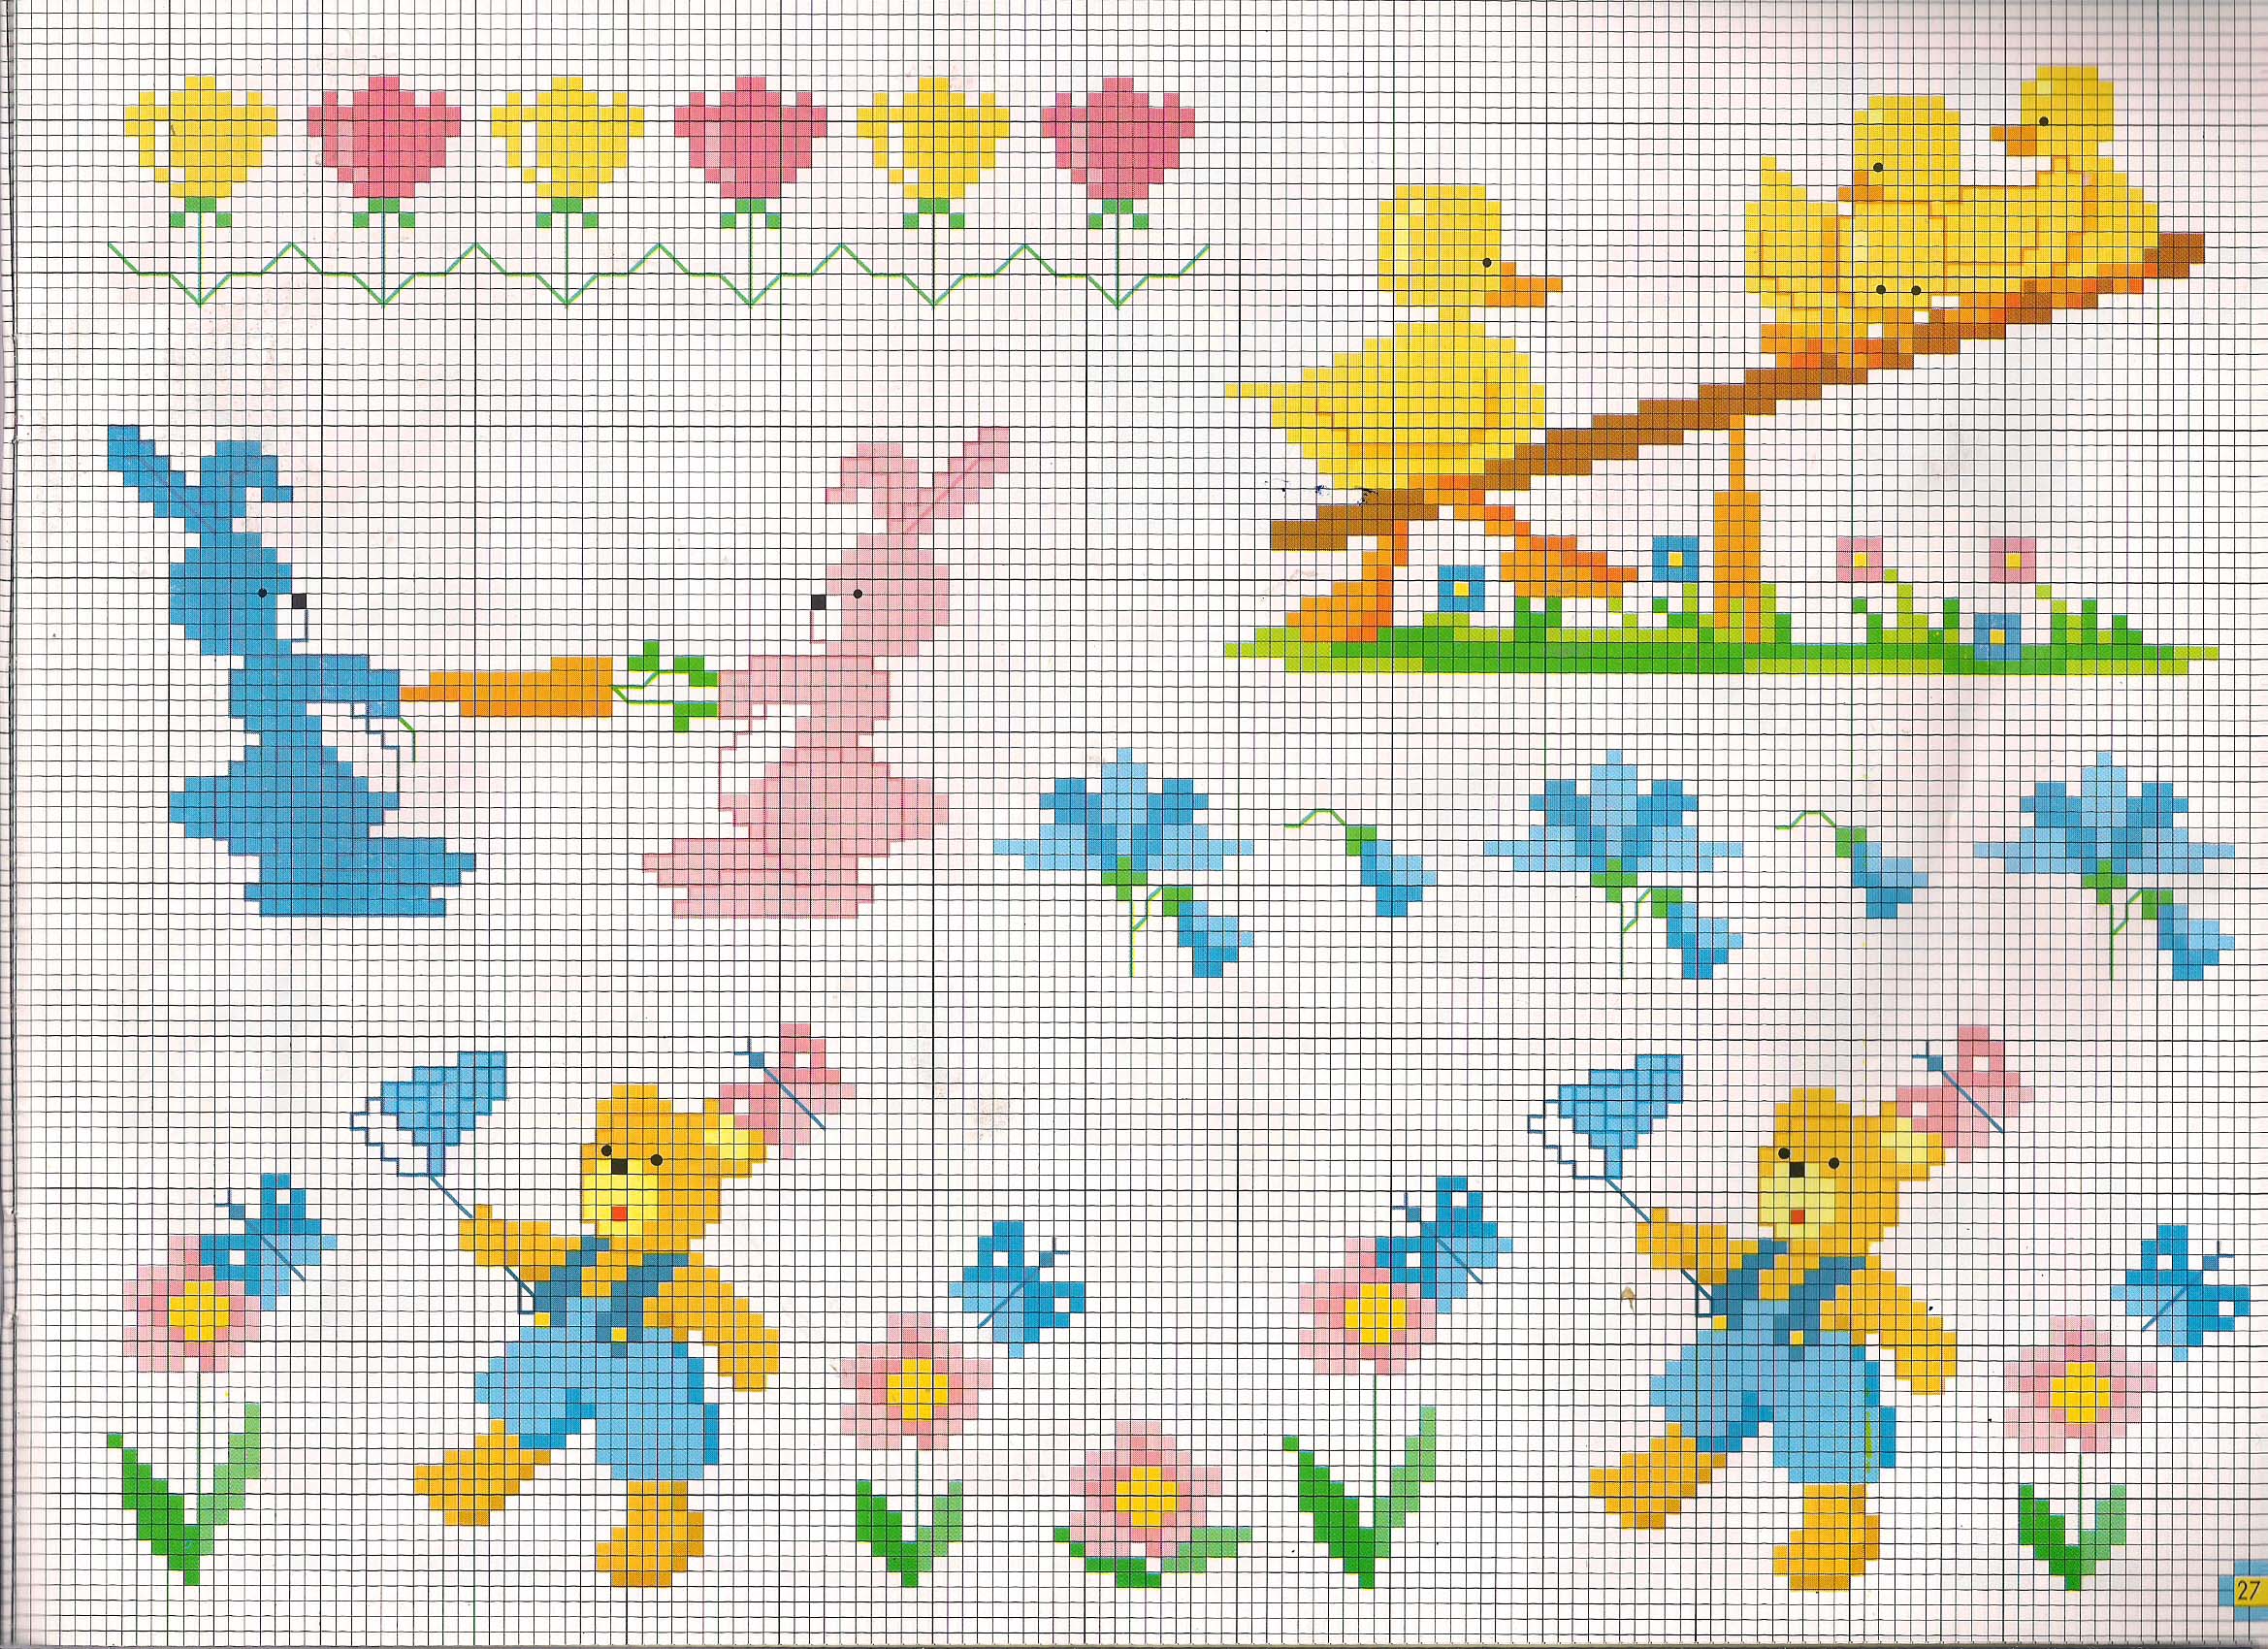 Bunnies and other baby animals playing with carrots cross stitch patterns